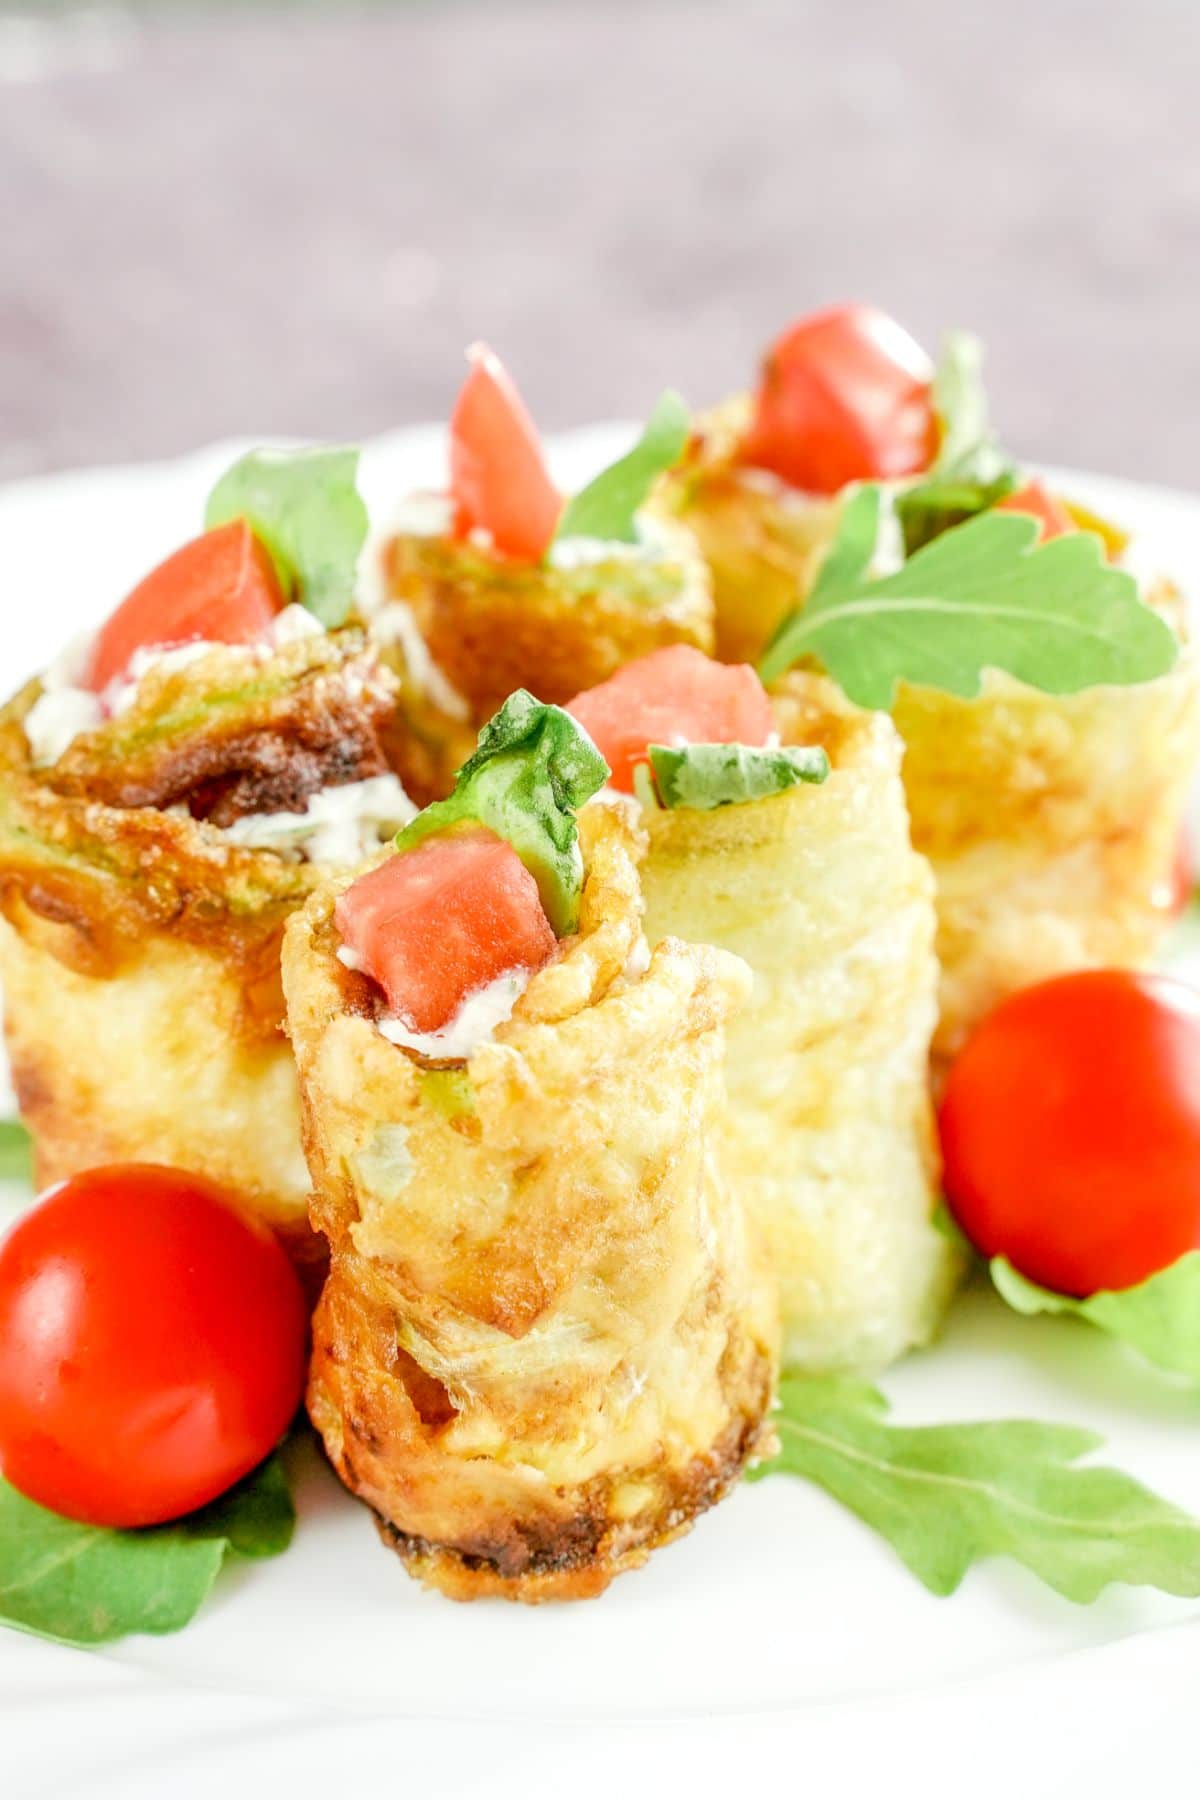 zucchini rolls stuffed with cheese and herbs on white plate